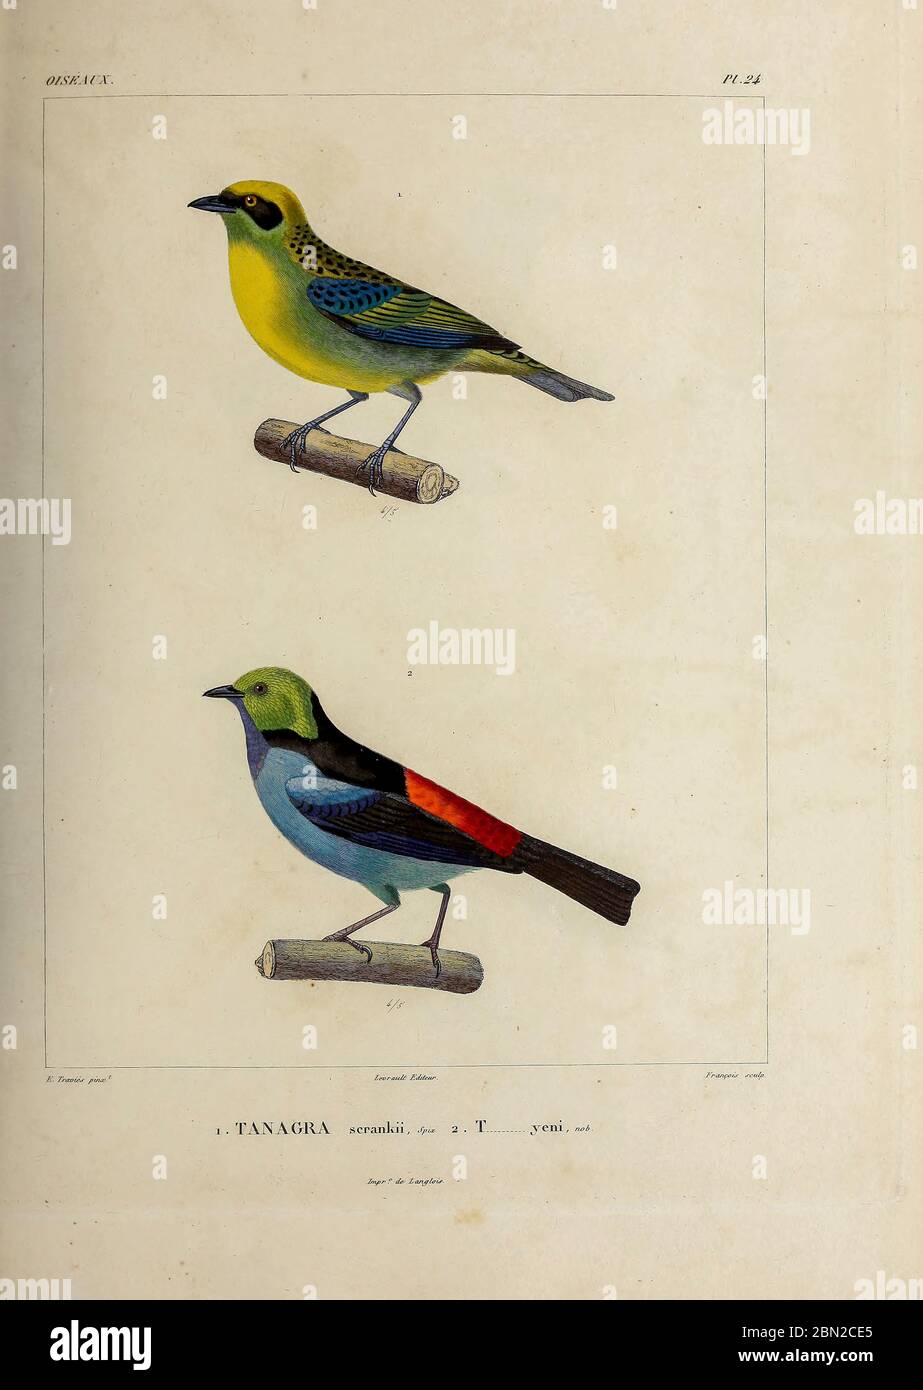 hand coloured sketch Top: green-and-gold tanager (Tangara schrankii [Here as Tanagra scrankii]) Bottom: paradise tanager (Tangara chilensis) [Here as Tanagra yeni]) From the book 'Voyage dans l'Amérique Méridionale' [Journey to South America: (Brazil, the eastern republic of Uruguay, the Argentine Republic, Patagonia, the republic of Chile, the republic of Bolivia, the republic of Peru), executed during the years 1826 - 1833] 4th volume Part 3 By: Orbigny, Alcide Dessalines d', d'Orbigny, 1802-1857; Montagne, Jean François Camille, 1784-1866; Martius, Karl Friedrich Philipp von, 1794-1868 Pub Stock Photo